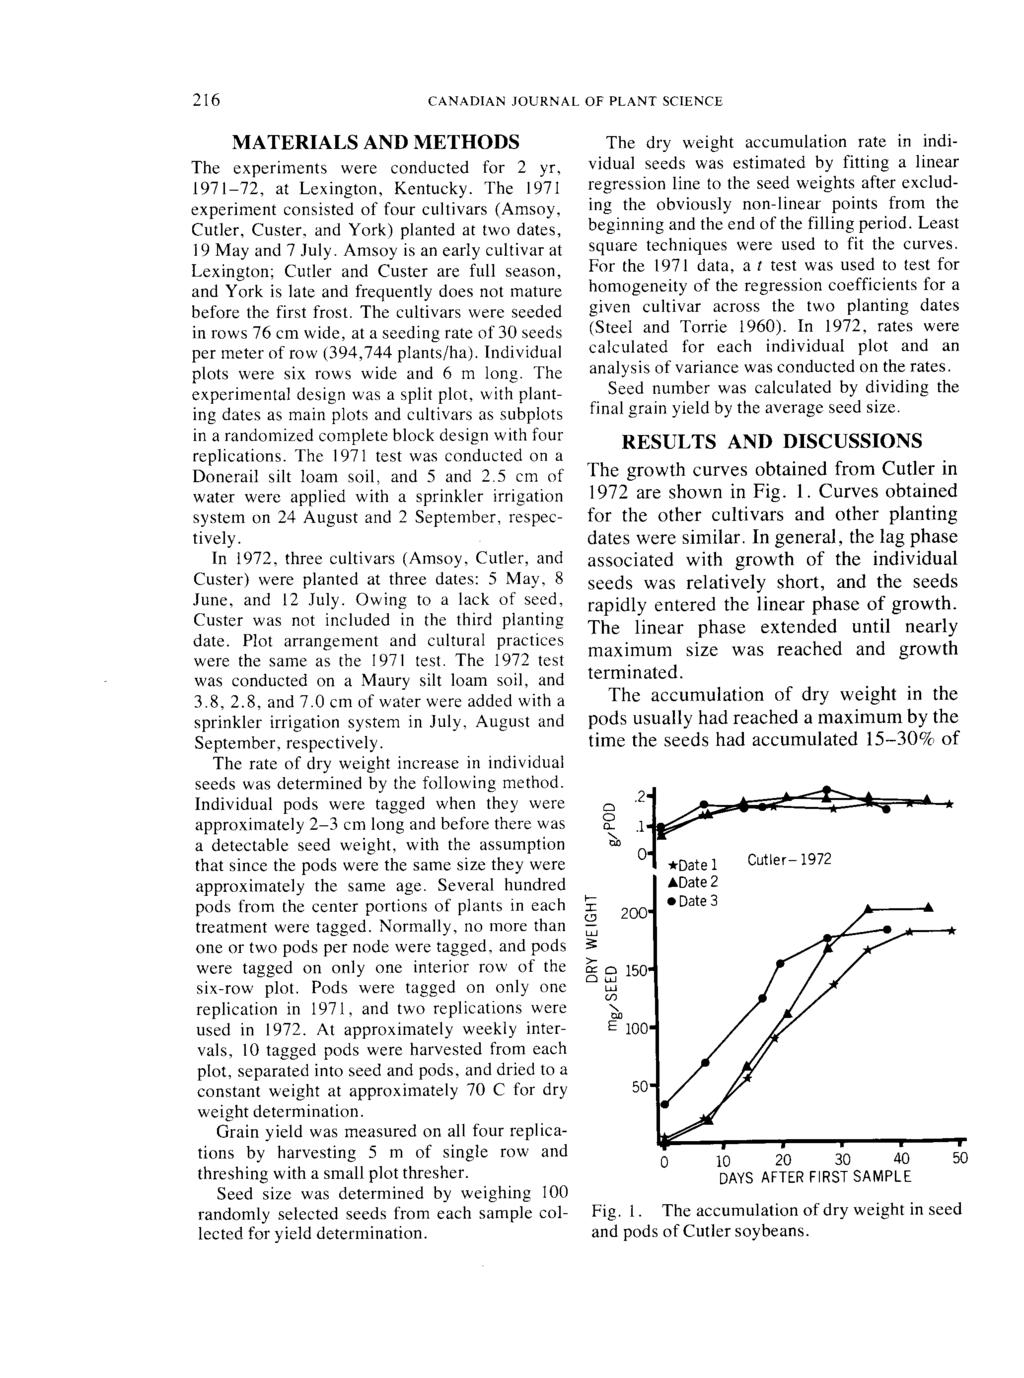 lt CANADIAN JOURNAL OF PLANT SCIENCE MATERIALS AND METHODS The experiments were cnducted fr 2 yr, l9'7 1-'72, at Lexingtn, Kentucky.